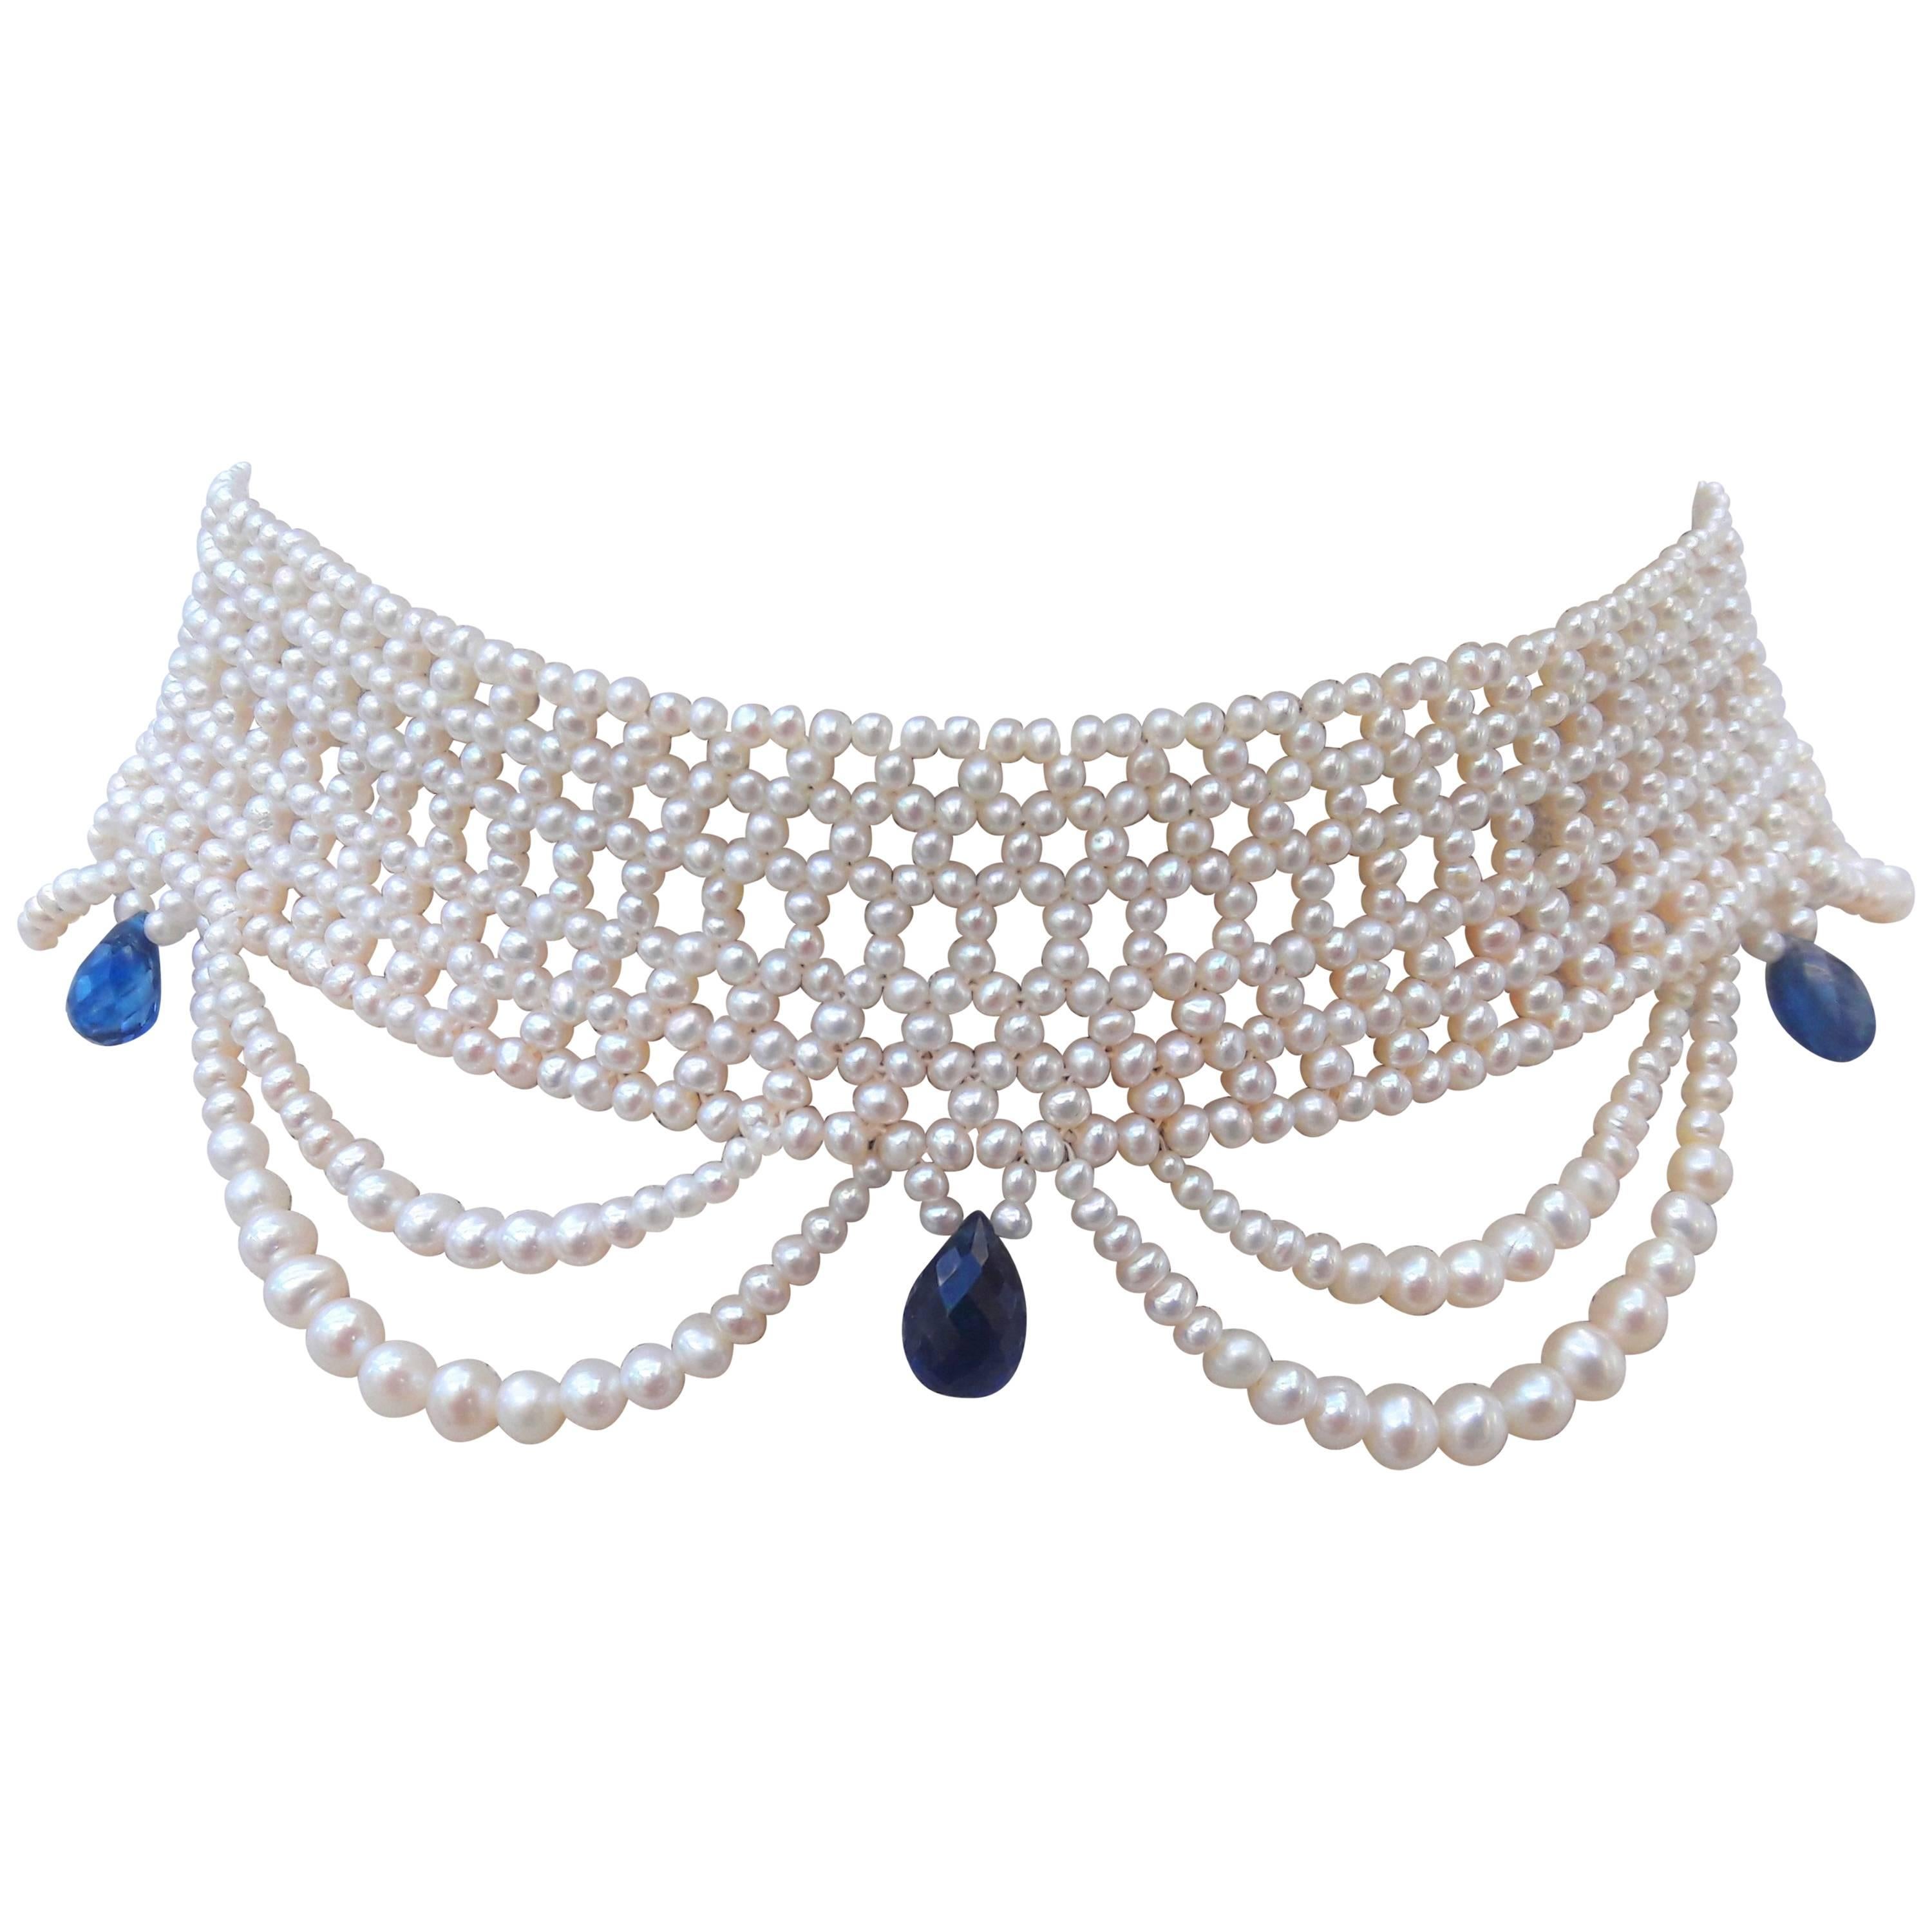 Marina J Woven Pearl Draped Choker Necklace with Kyanite Briolets 